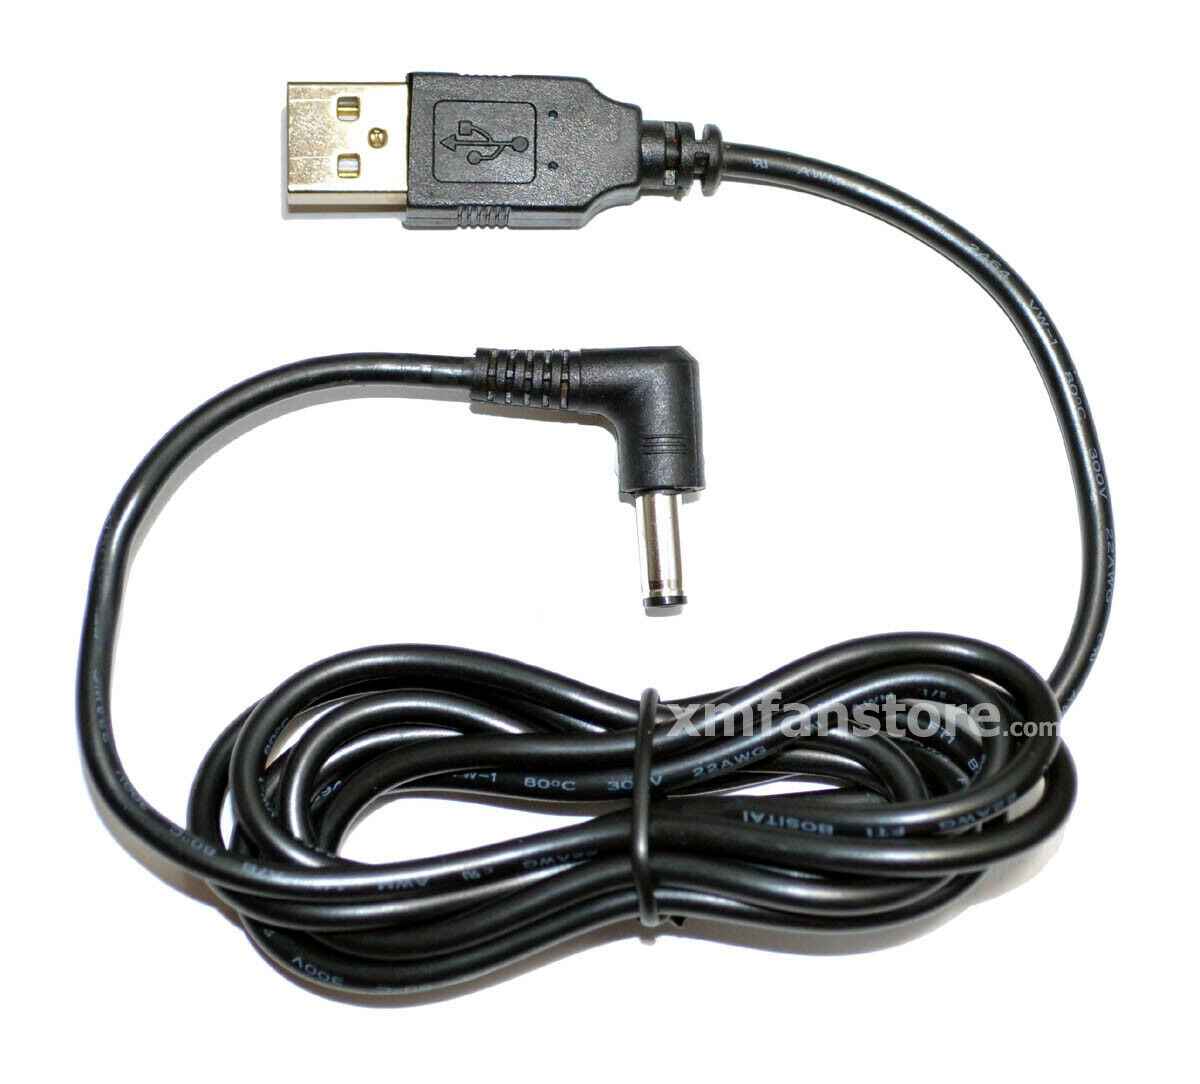 Usb Power Cable For Sirius Xm Radios (5 Foot Power Cord)